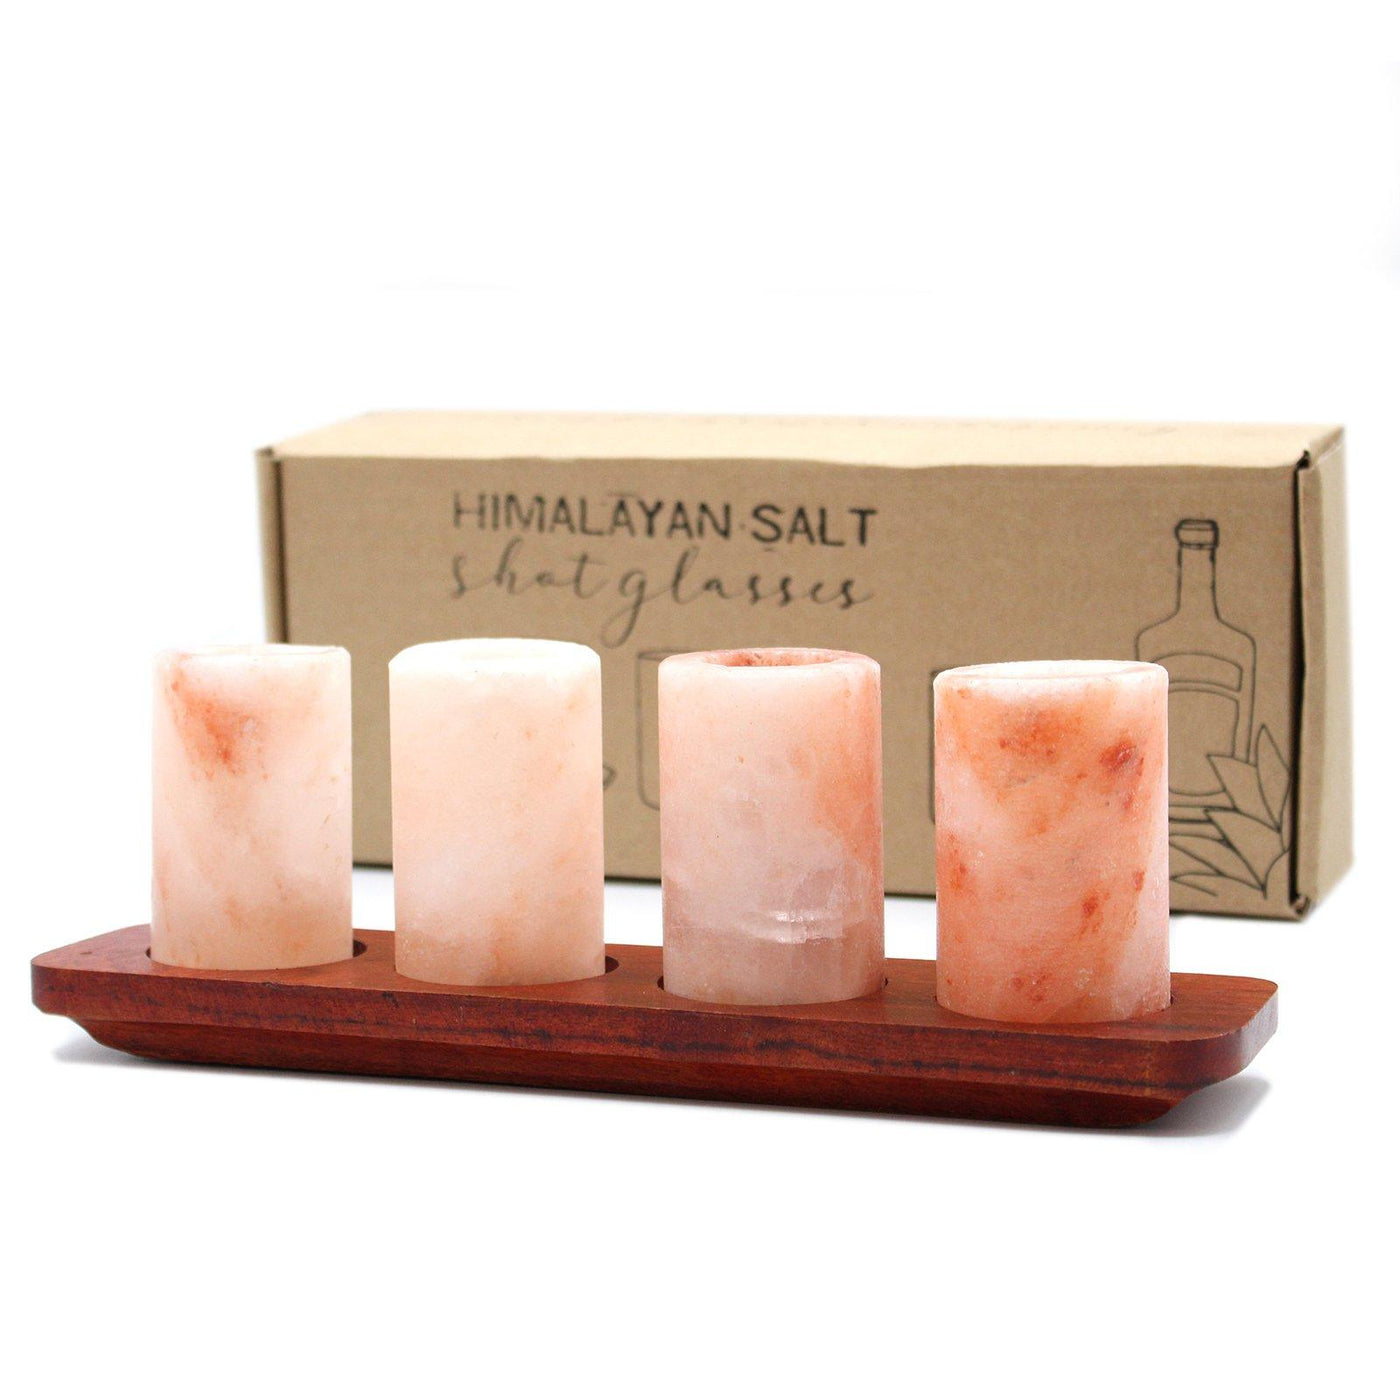 Set of 4 Himalayan Salt Shot Glasses With Wooden Serving Tray.